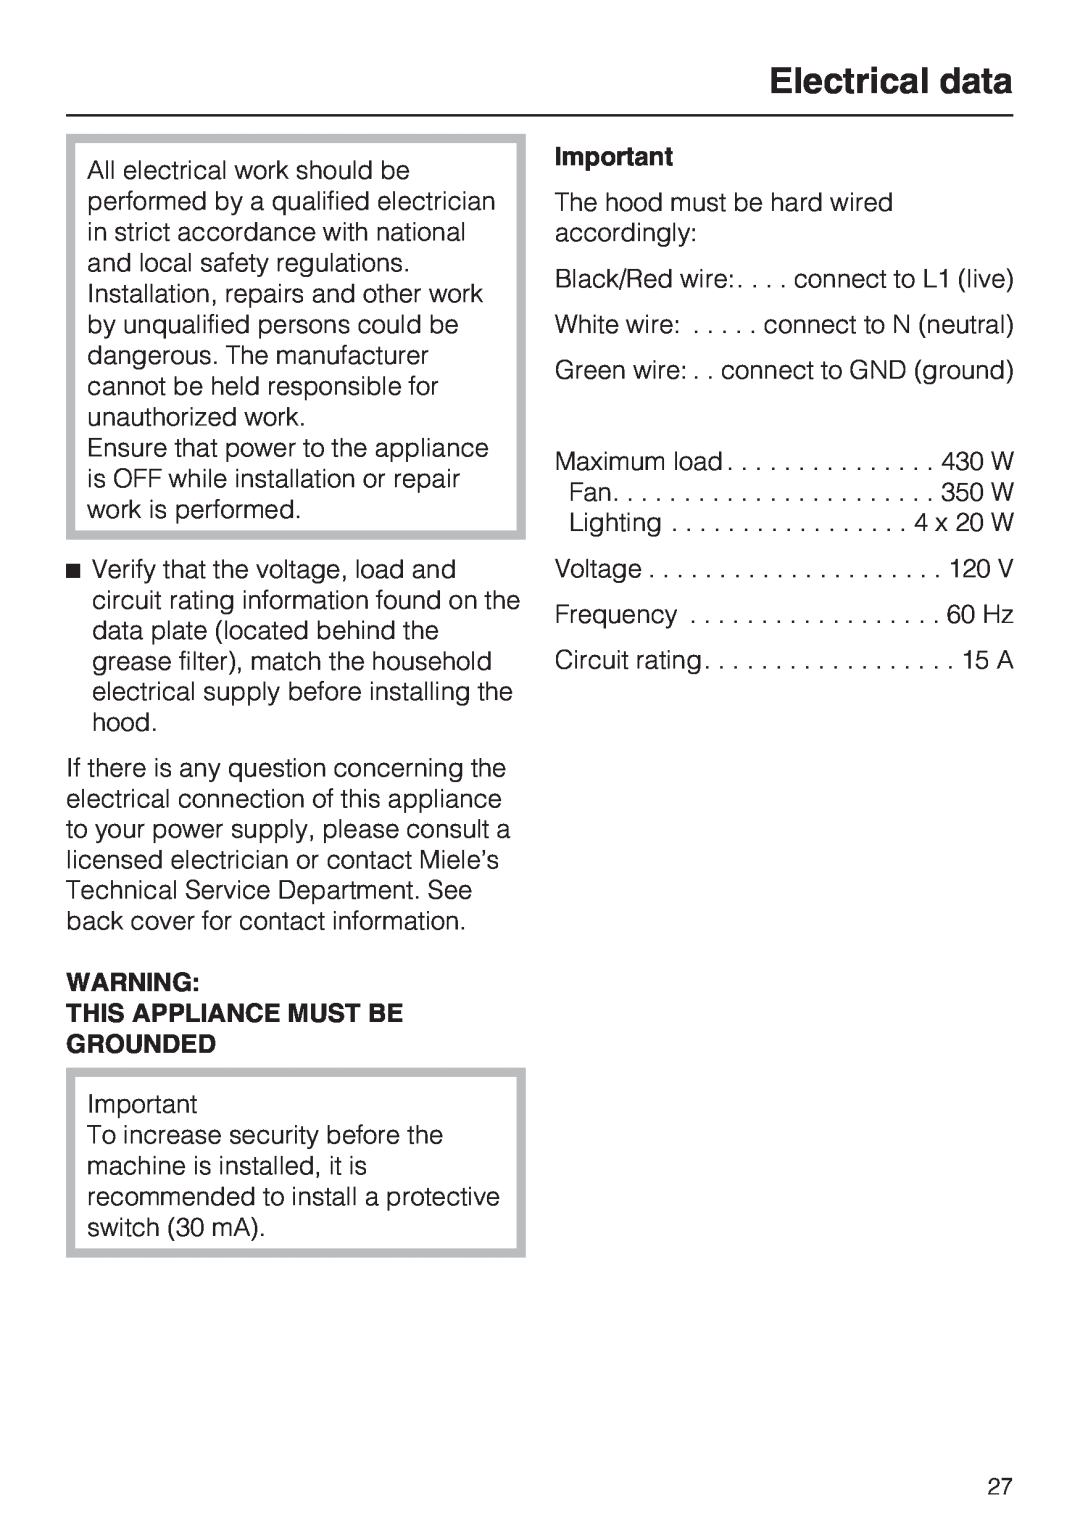 Miele DA 5100 D installation instructions Electrical data, This Appliance Must Be Grounded 